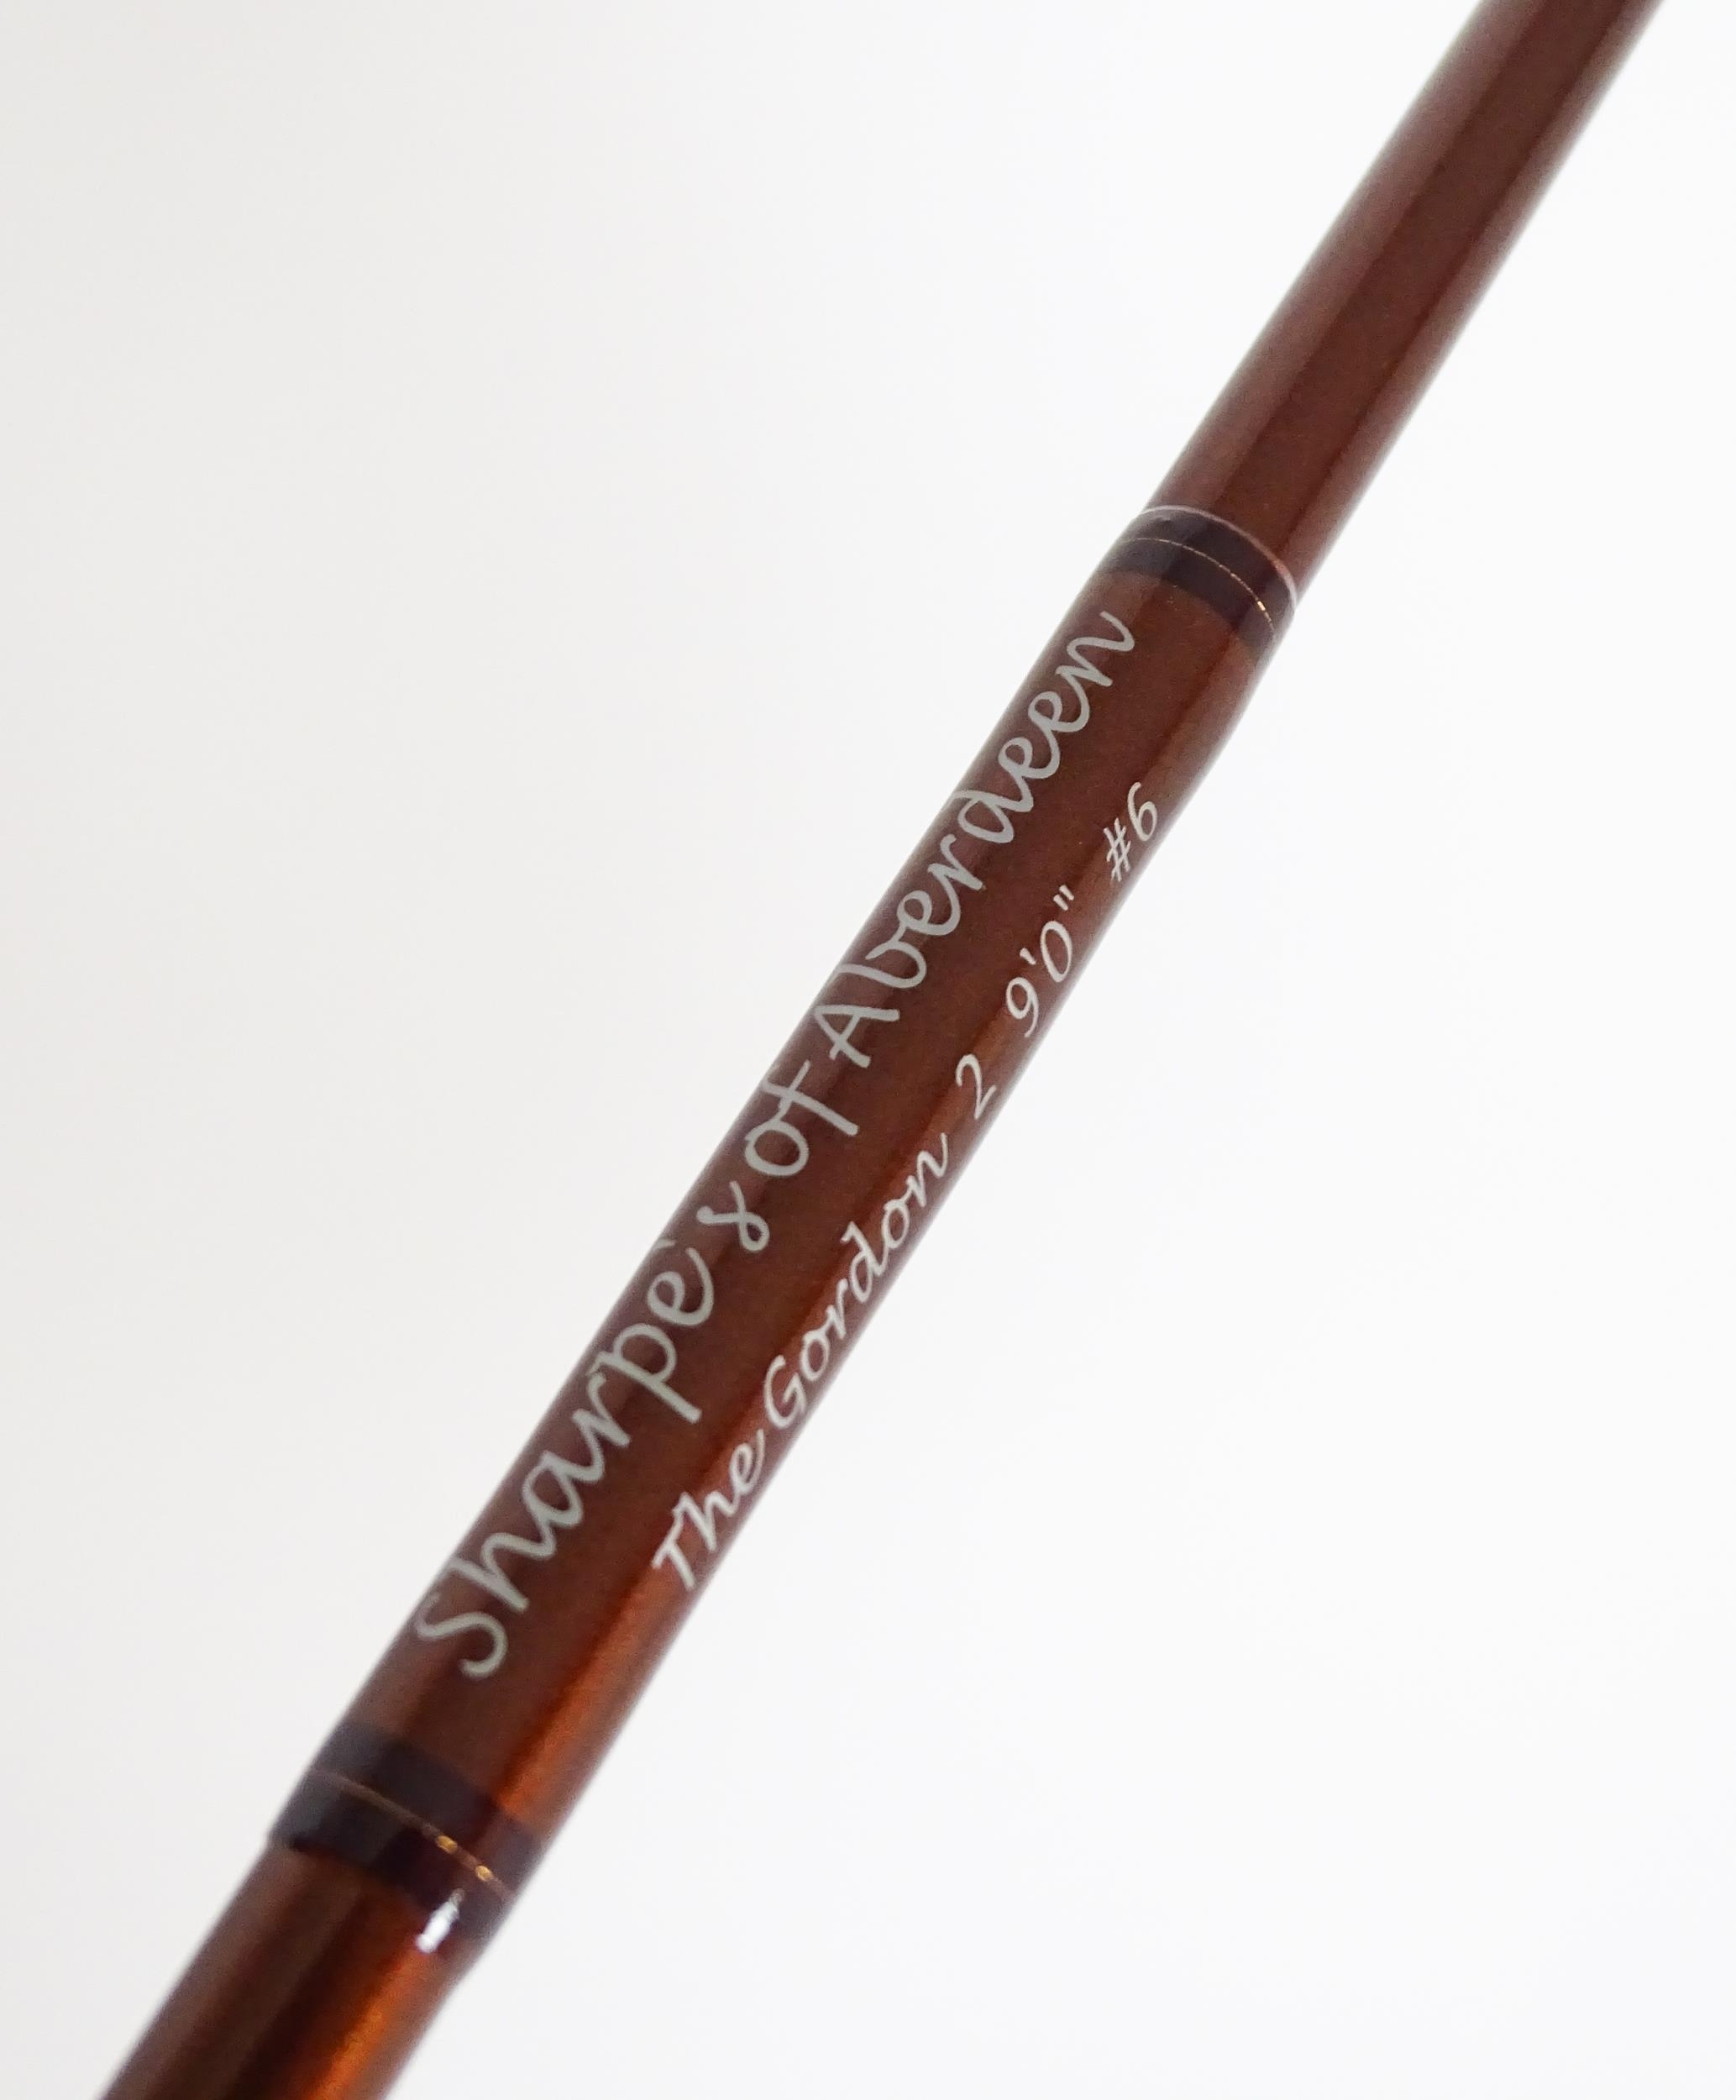 Fishing : a Sharpe's of Aberdeen 'Gordon 2' three-piece fly rod, approx 108" long. With cloth case - Image 6 of 7